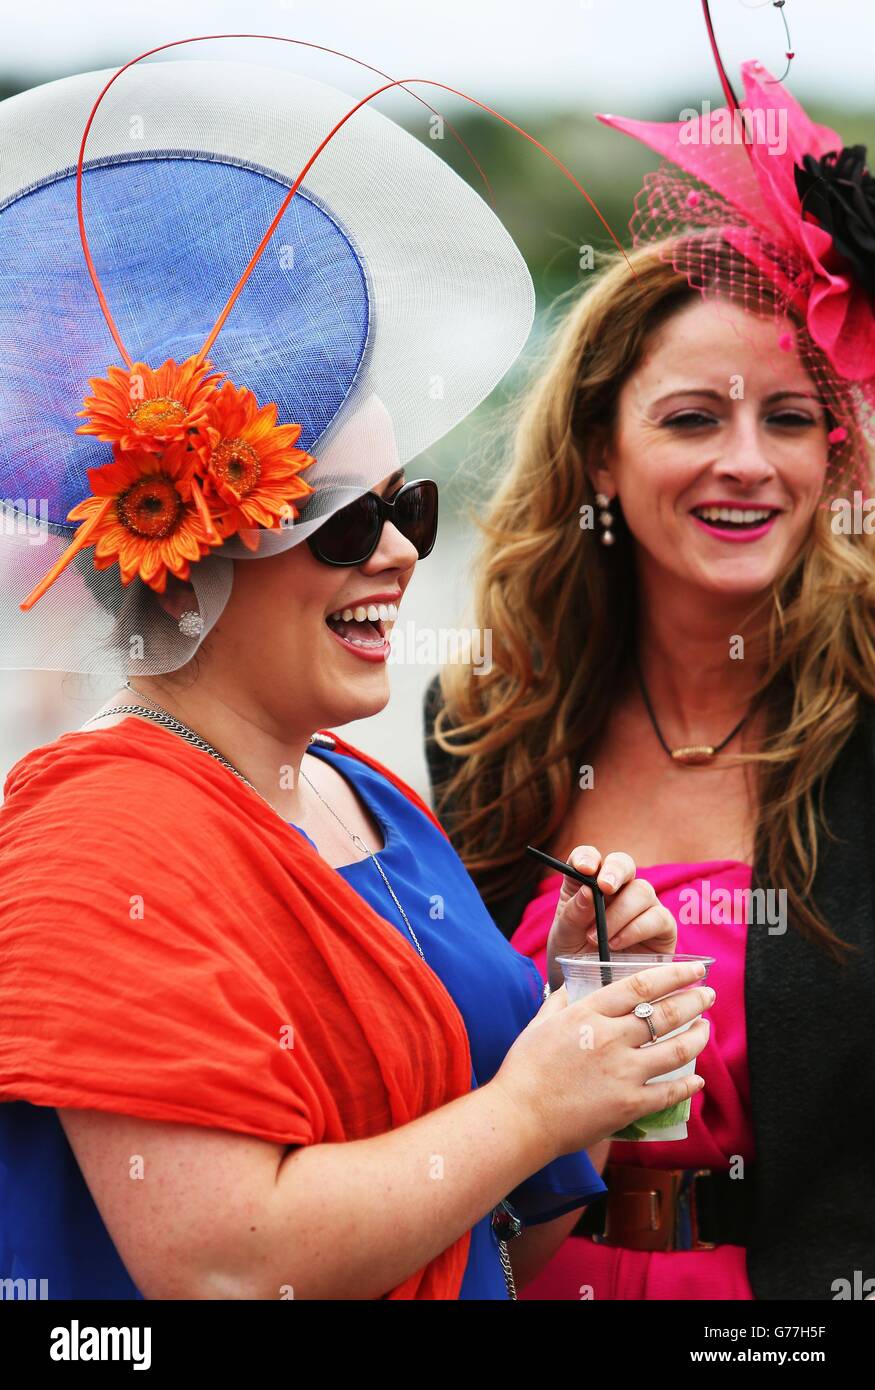 Sisters Kristine Koffey, from Athenry, left, and her sister Alison Koffey, who is returning home from Brisbane, Australia, for the first time in 4 years, on day one of the Galway Festival at Galway Racecourse, Ireland. Stock Photo